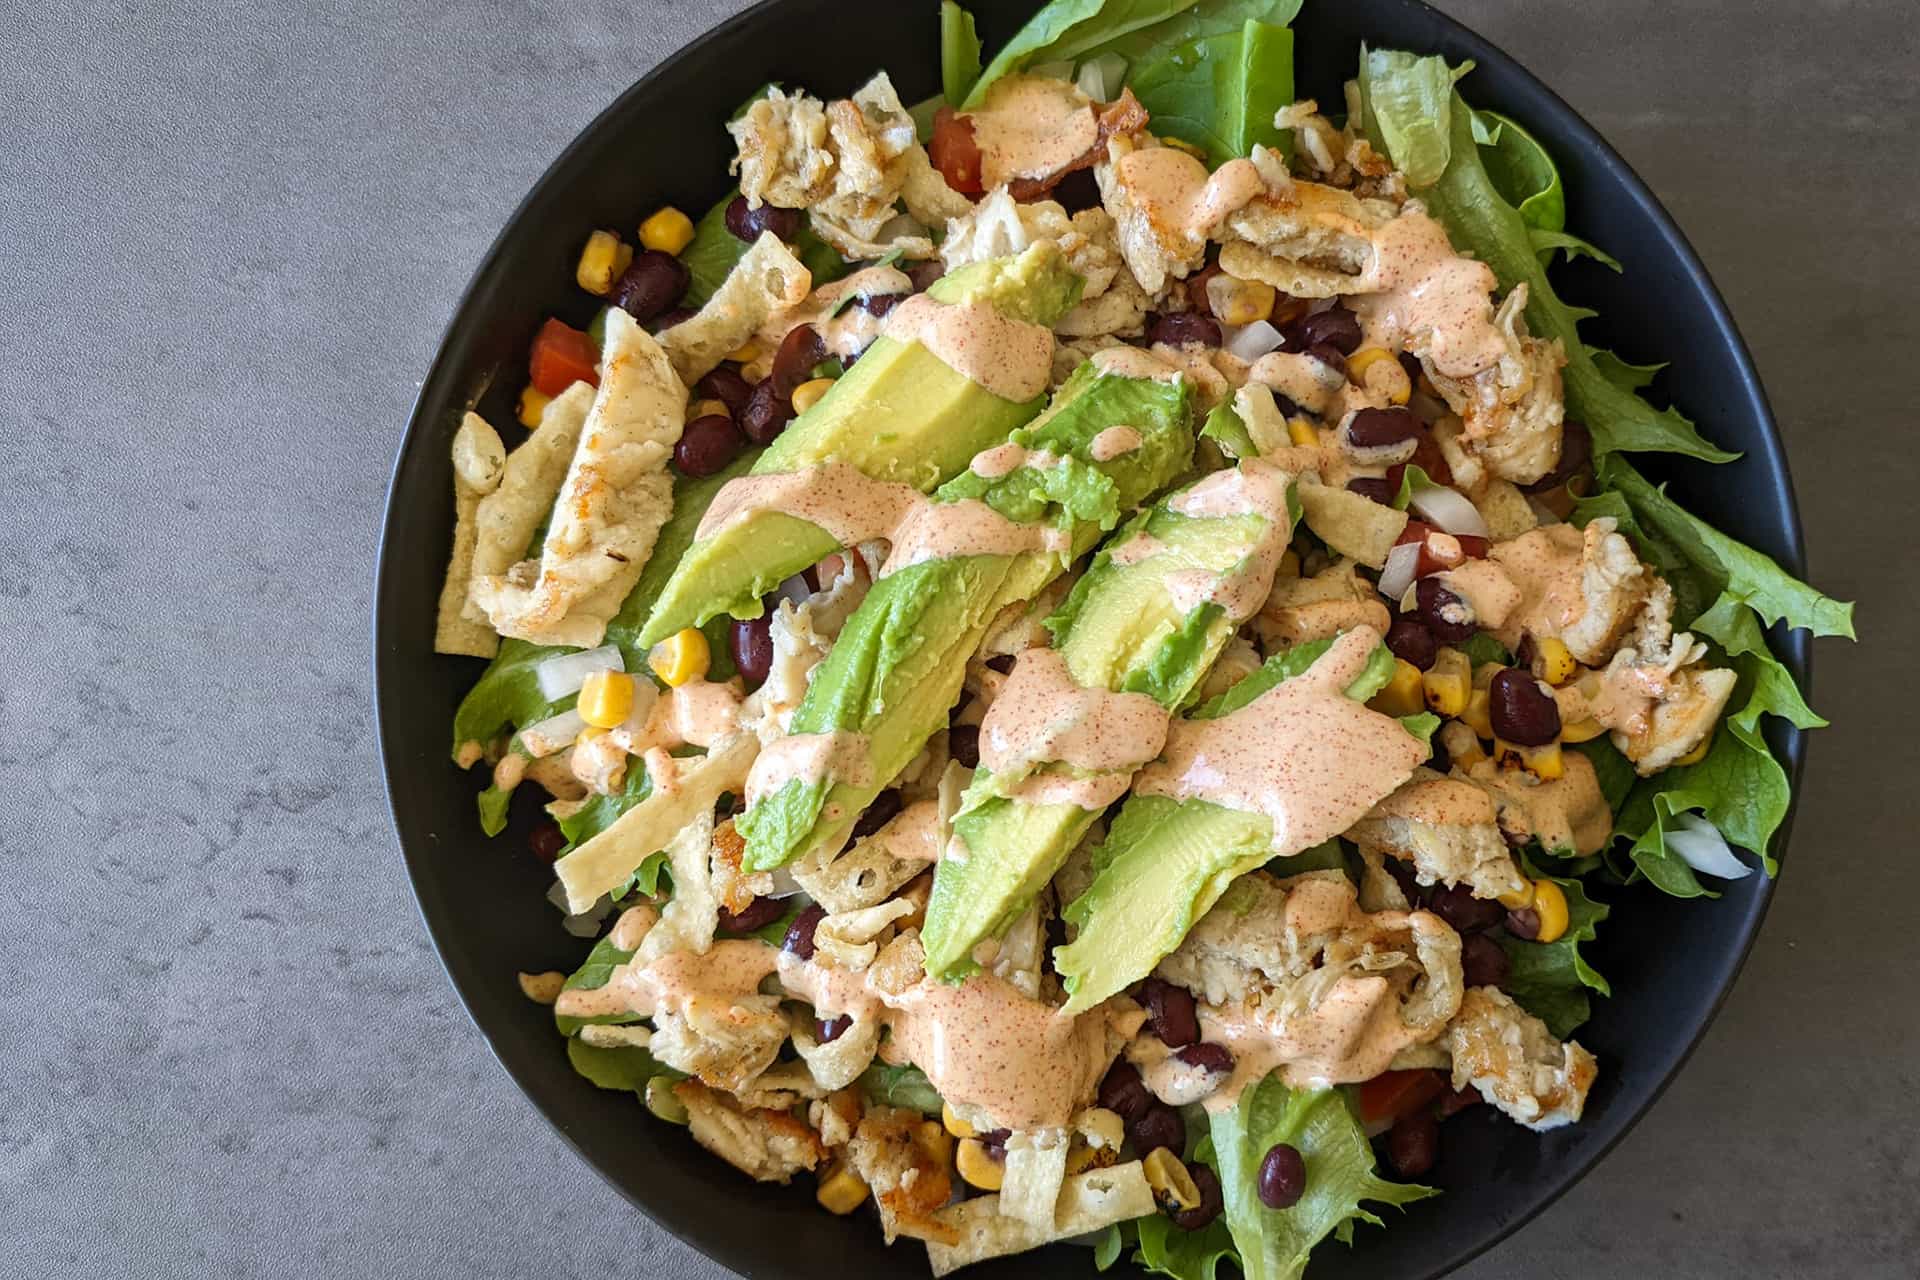 A southwest salad with chili lime dressing and chicken